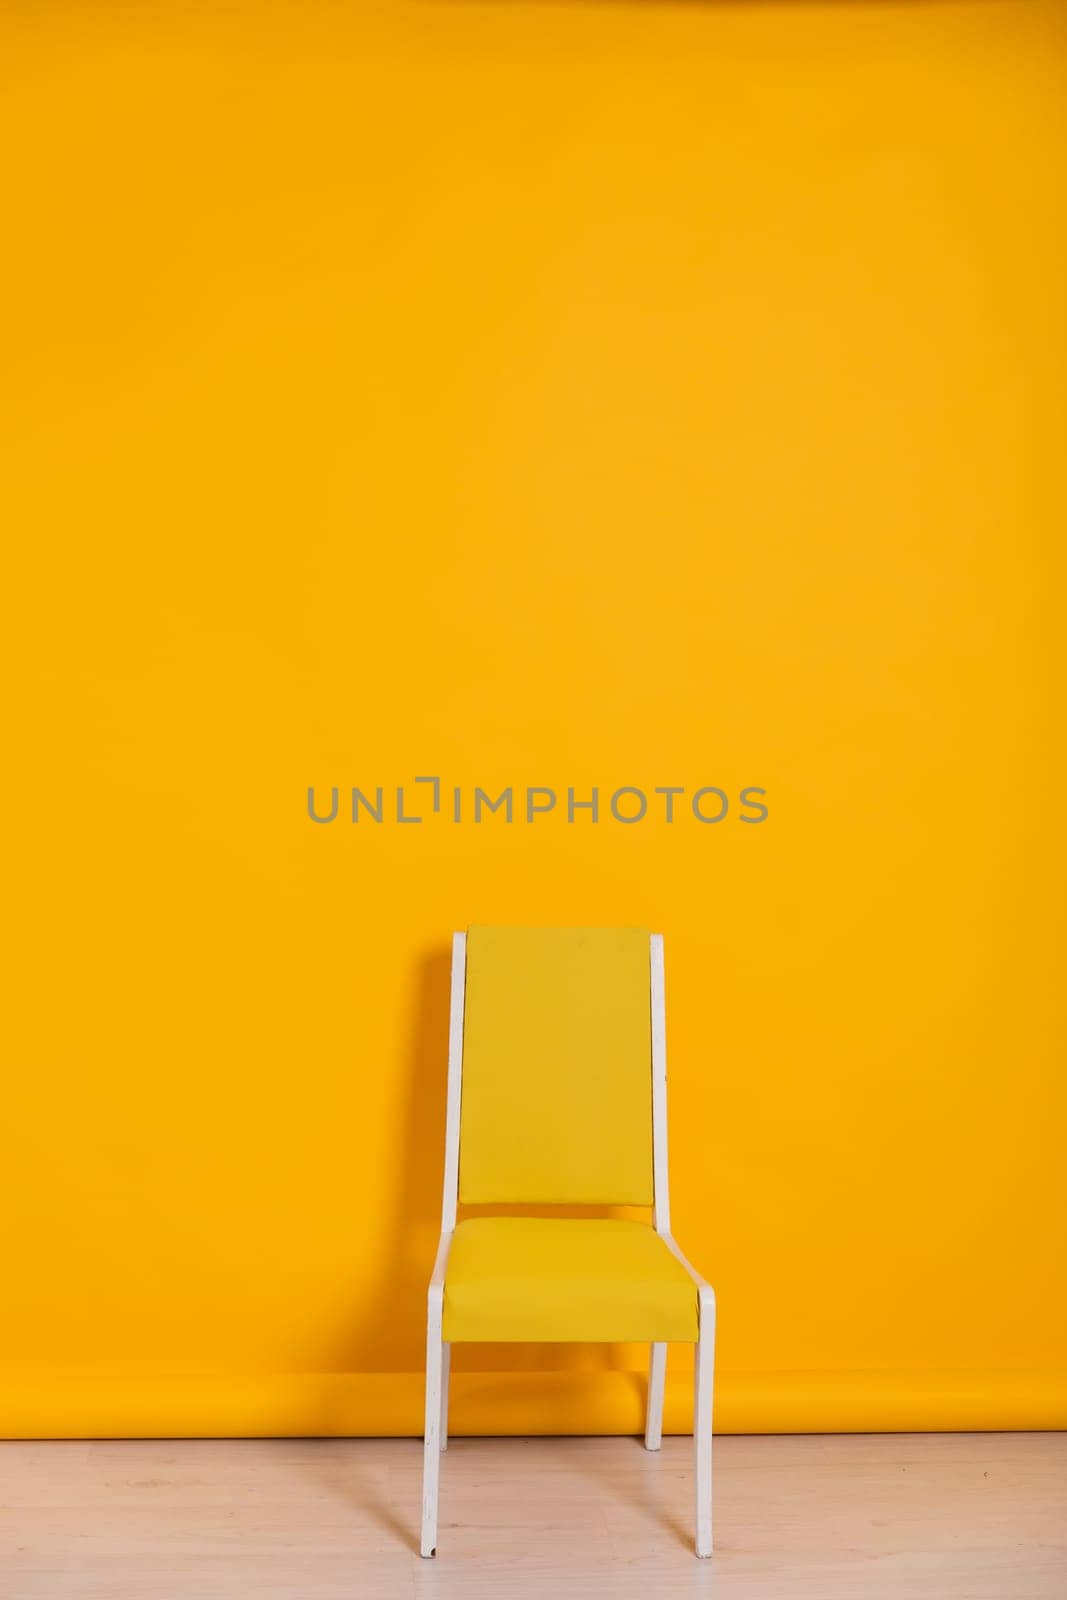 one chair in the room against the yellow wall interior furniture by Simakov